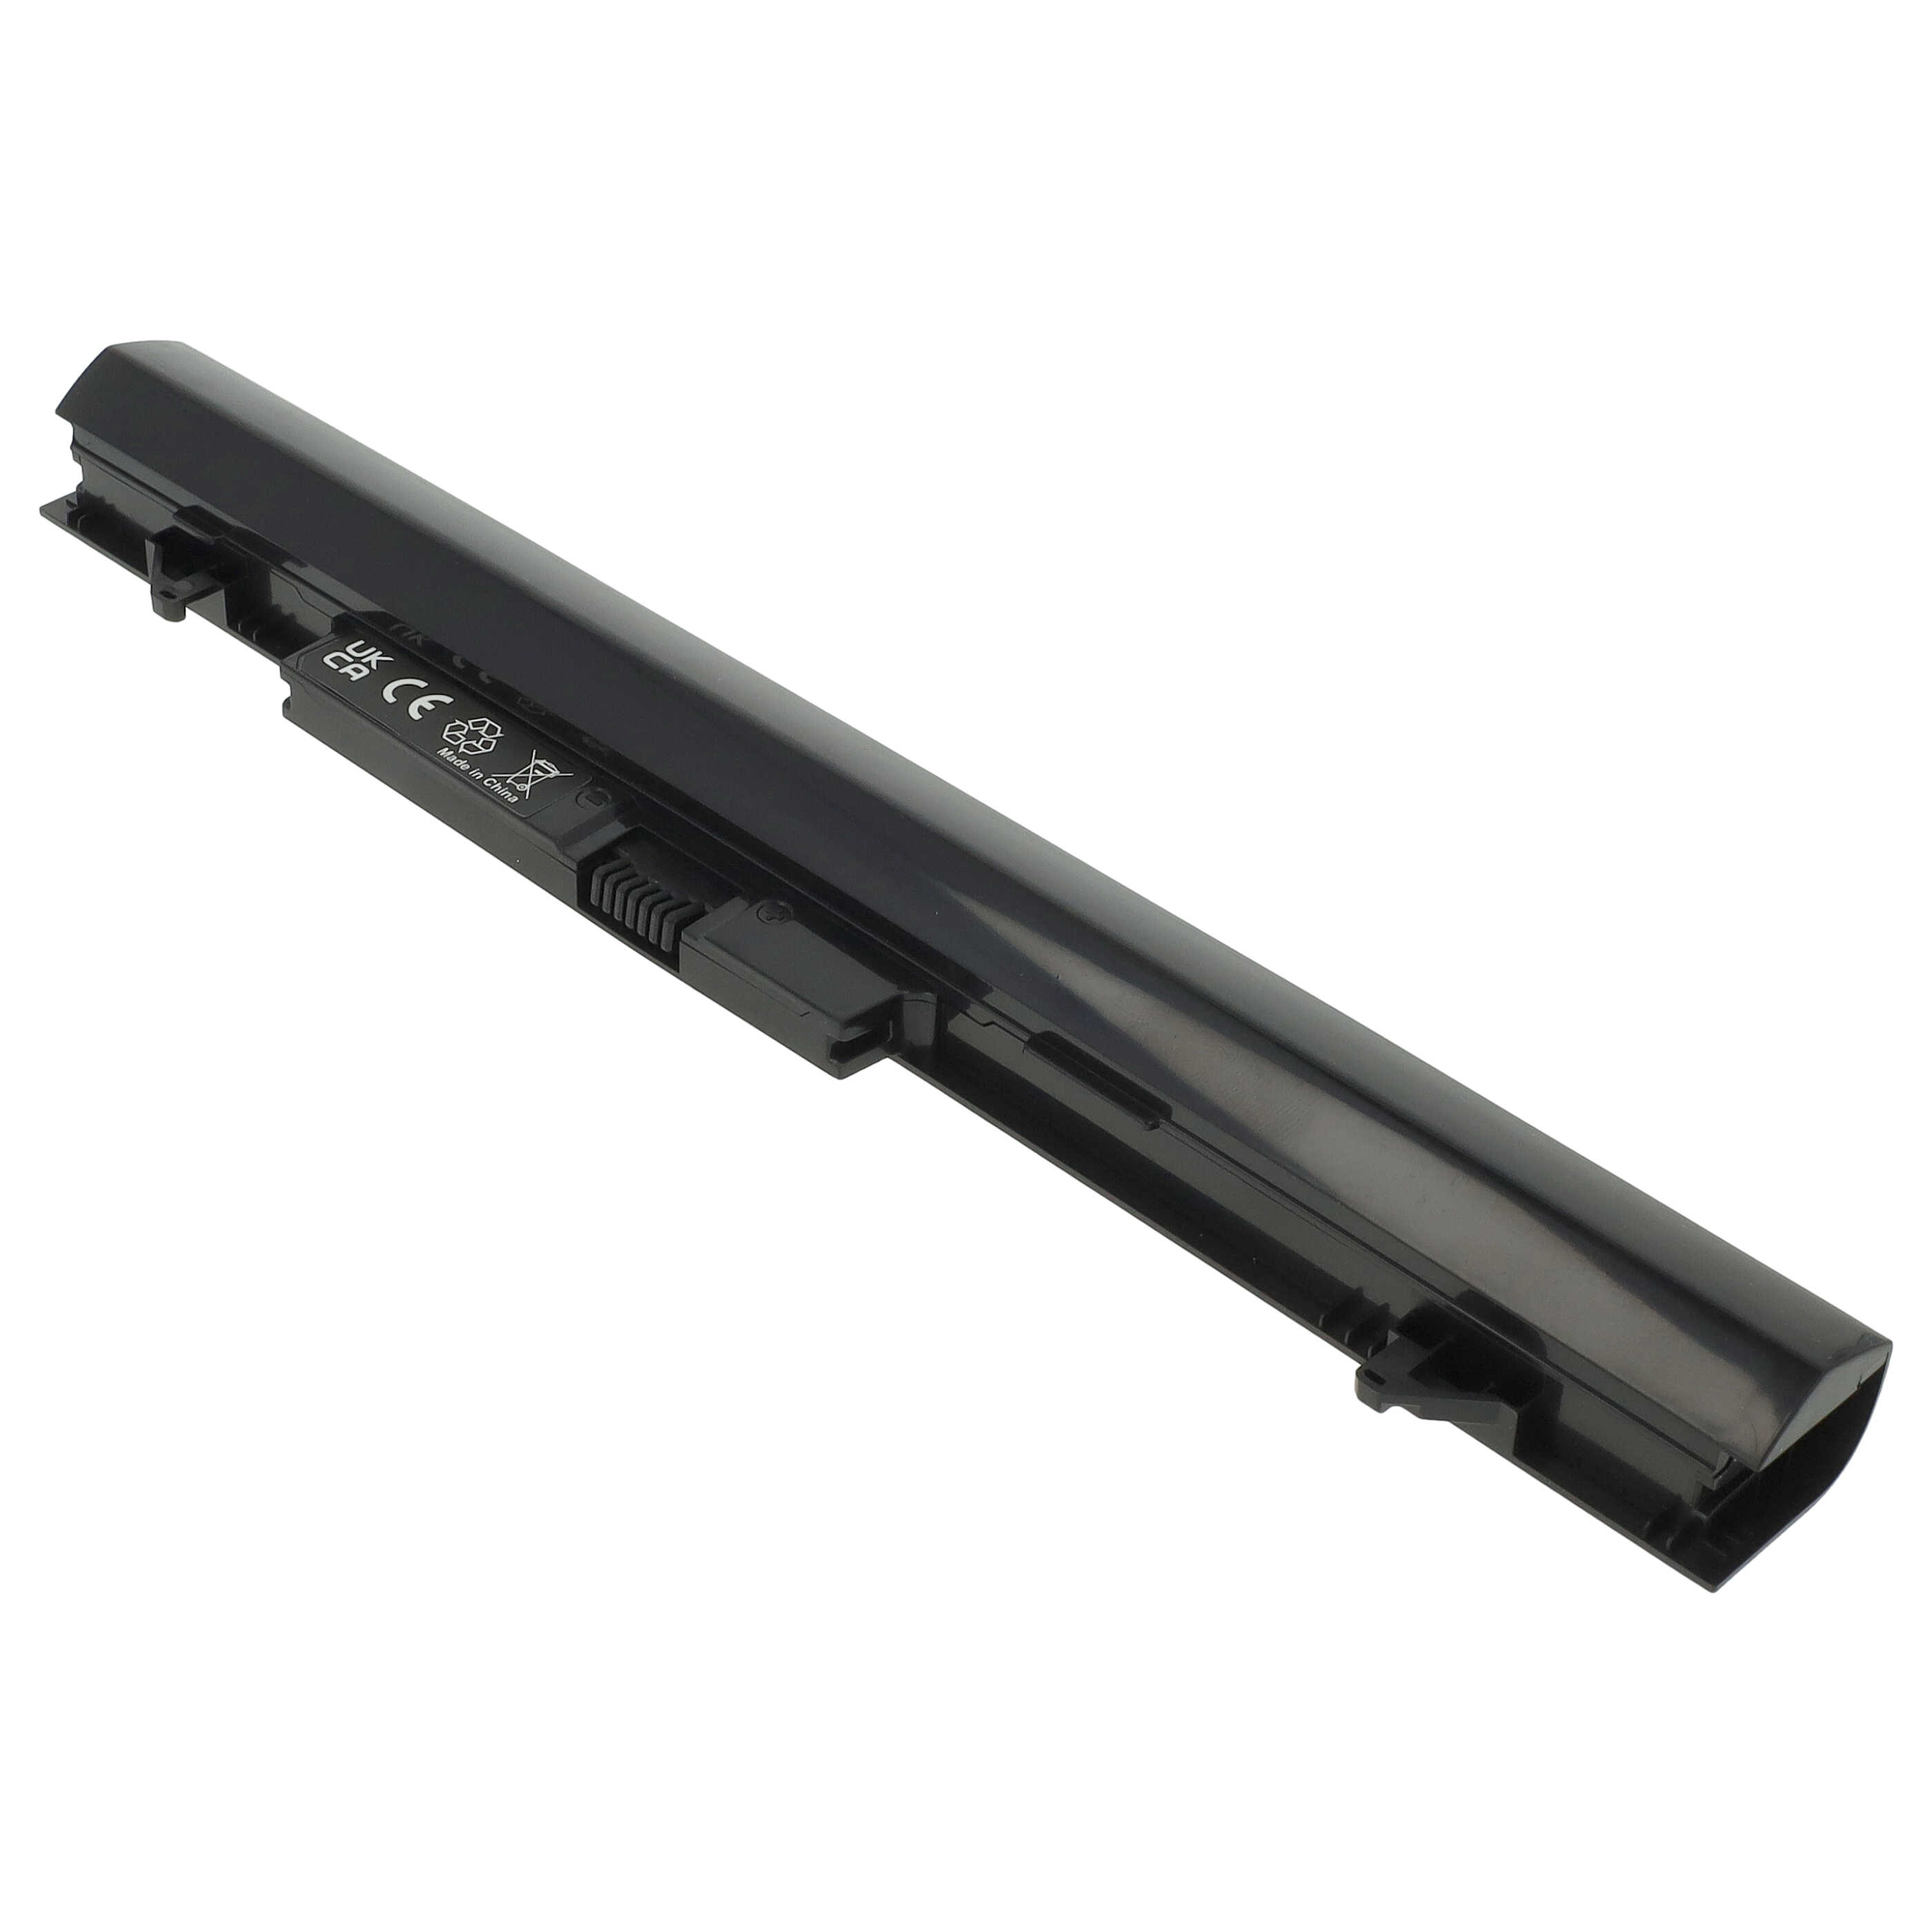 Notebook Battery Replacement for HP H6L28AA, 768549-001, HSTNN-IB4L, 707618-121 - 2600mAh 14.8V Li-Ion, grey